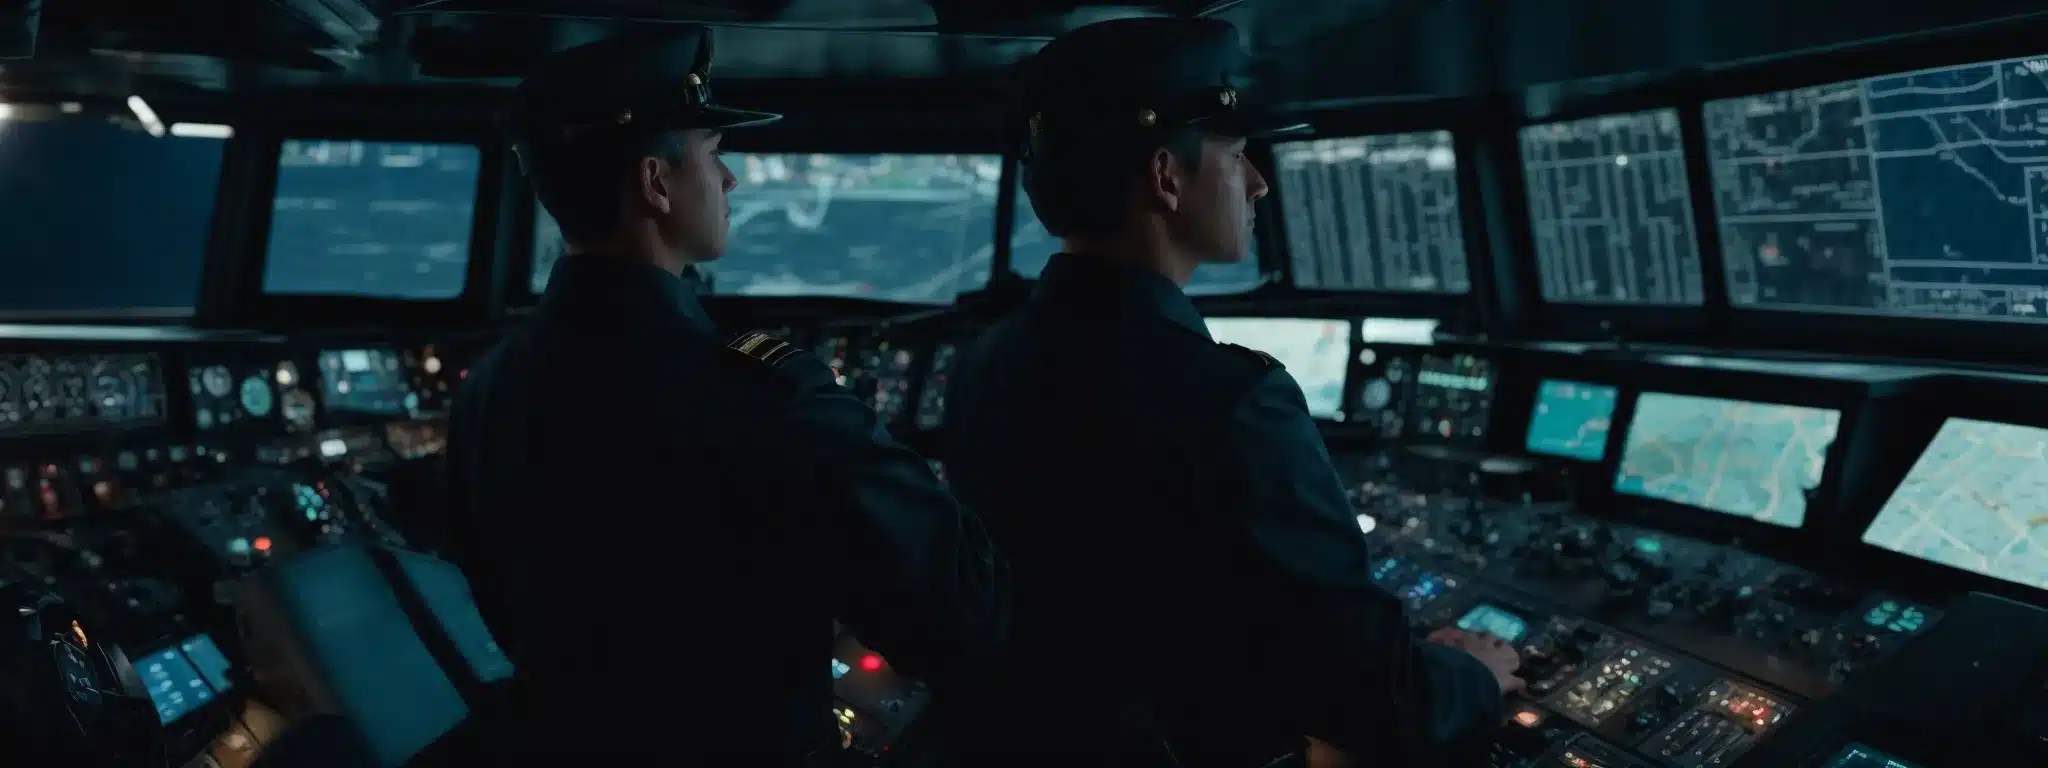 A Captain At The Helm Of A Modern Ship, Surrounded By High-Tech Navigation Screens And Controls.